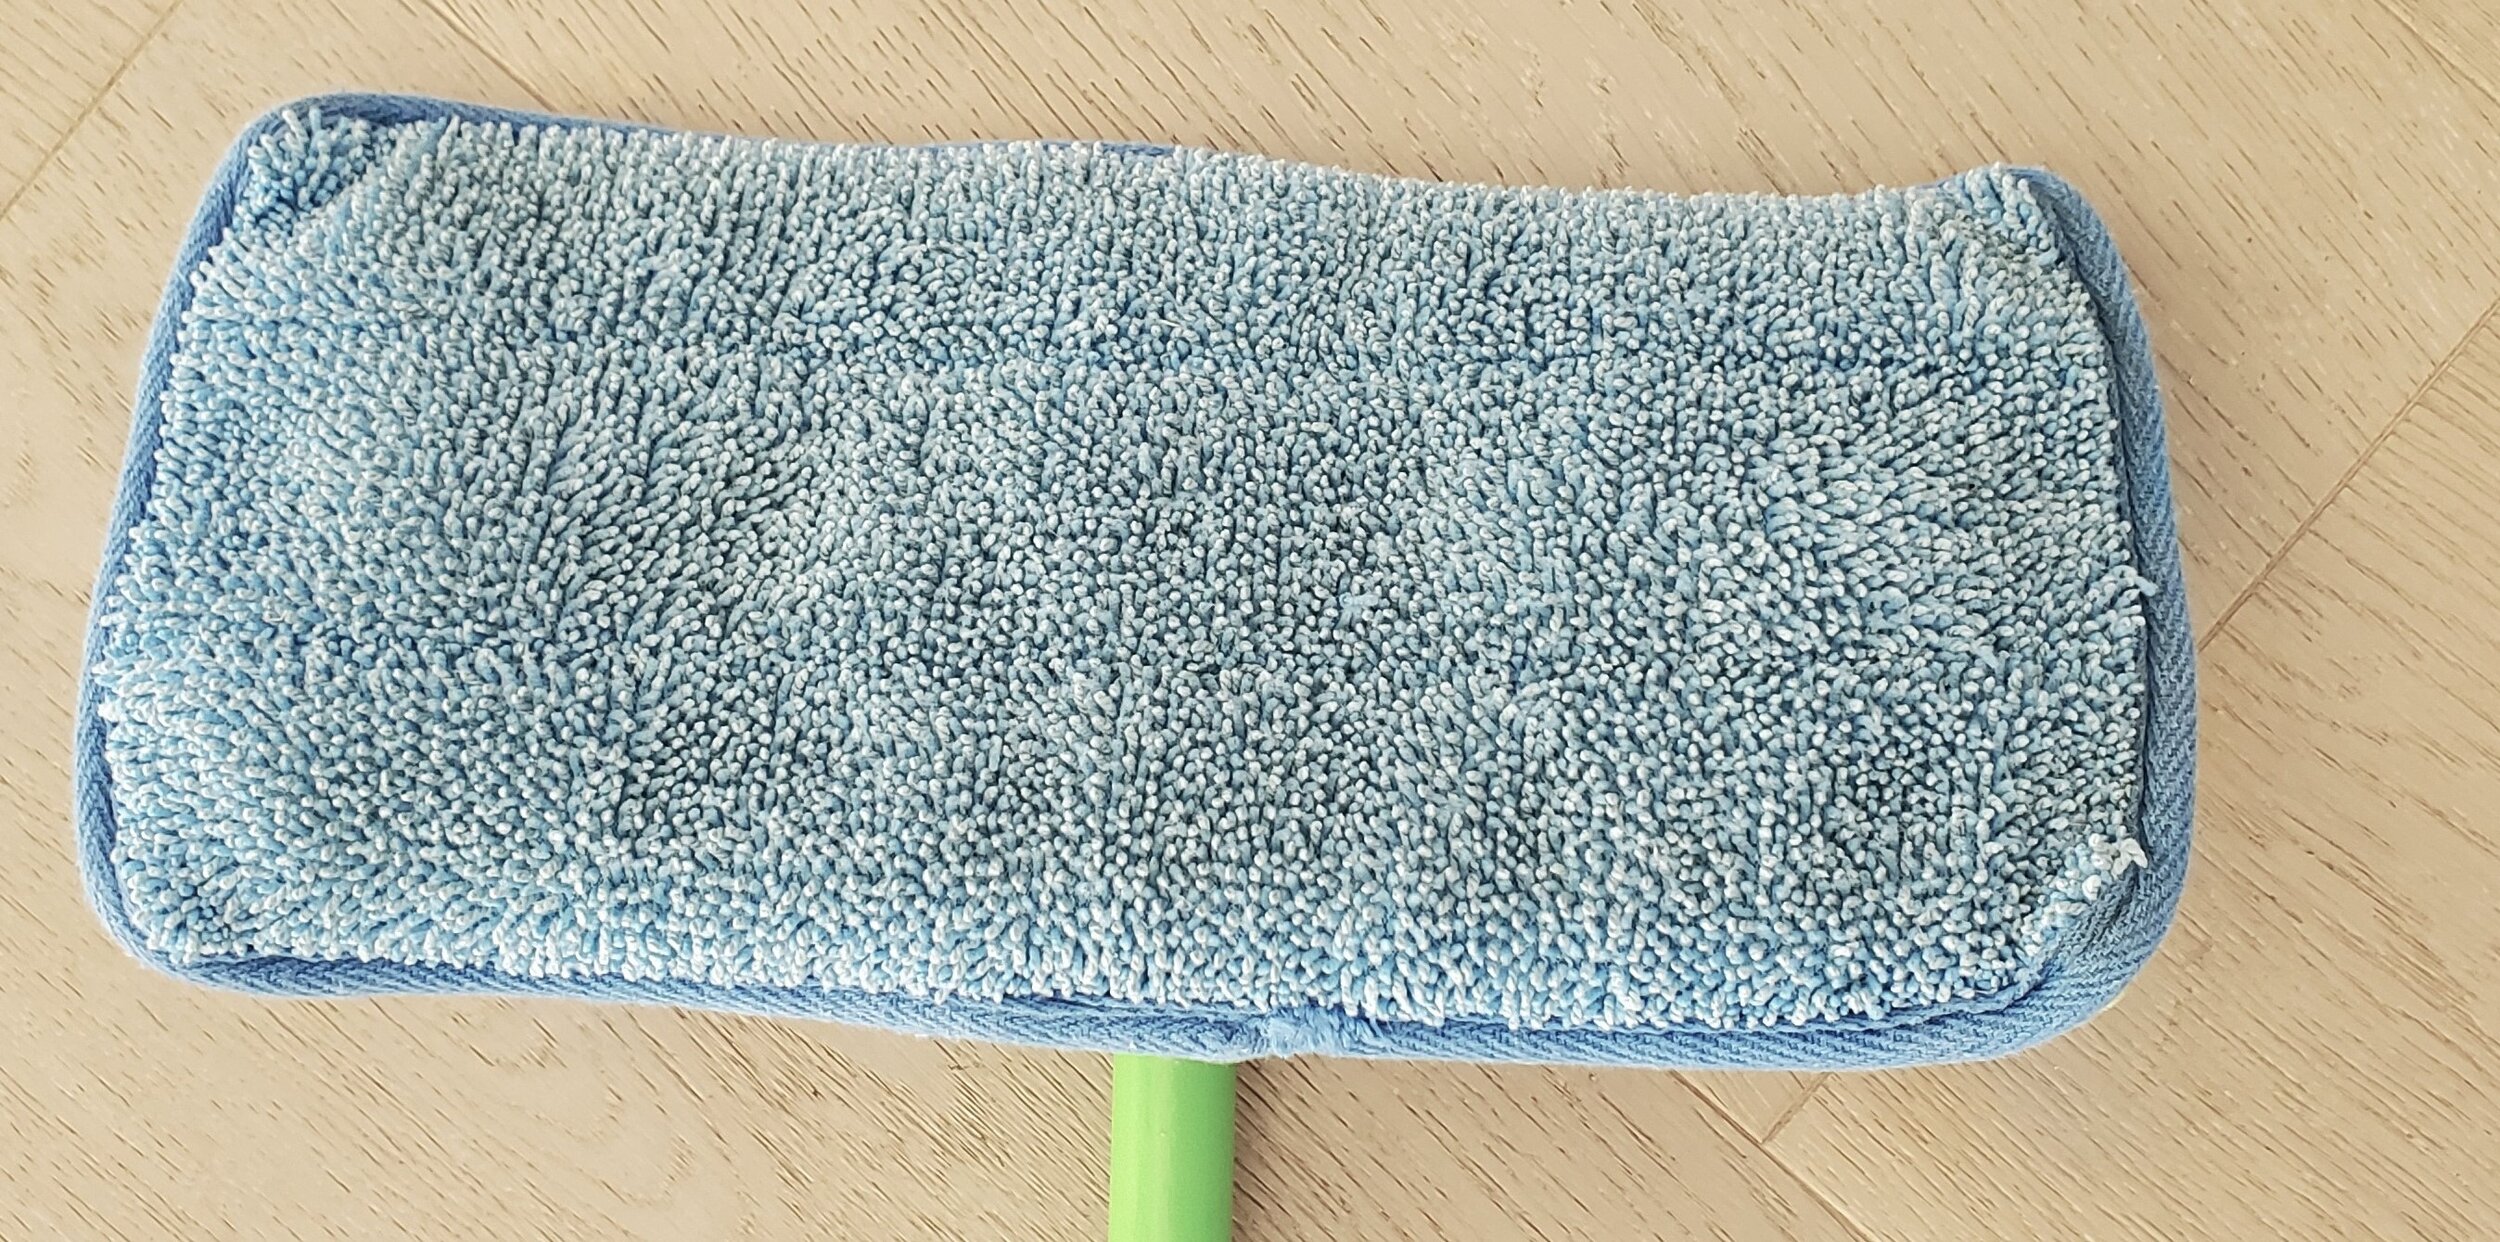 TRR Review: We mopped our floor with the washable Microfiber Mop Pads and  this is what we thought. — The Reduce Report